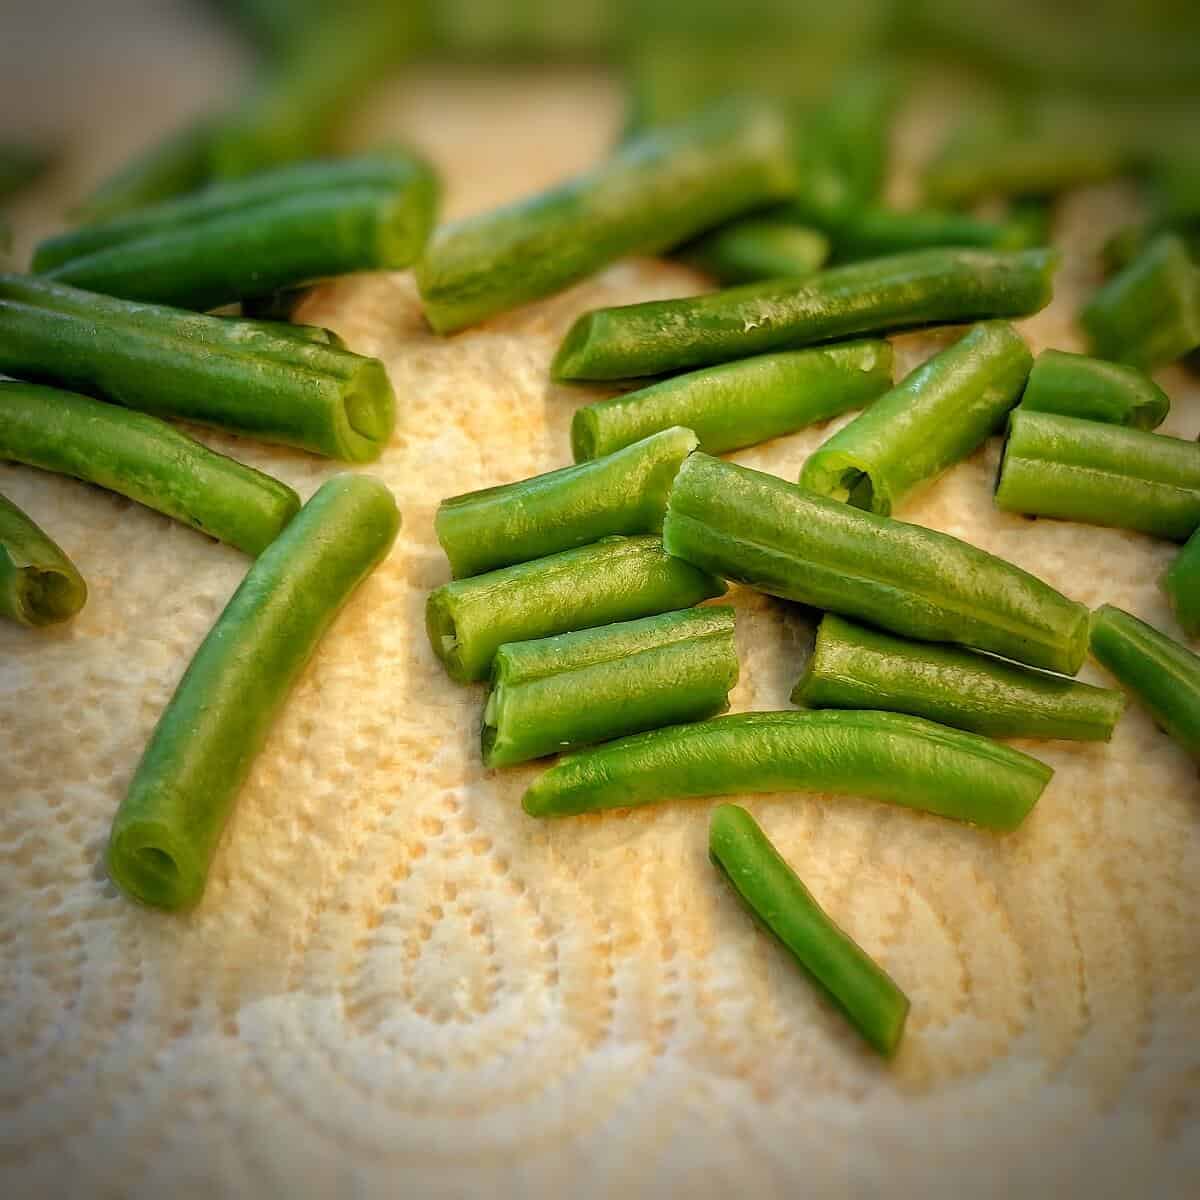 thawed green beans on paper towel